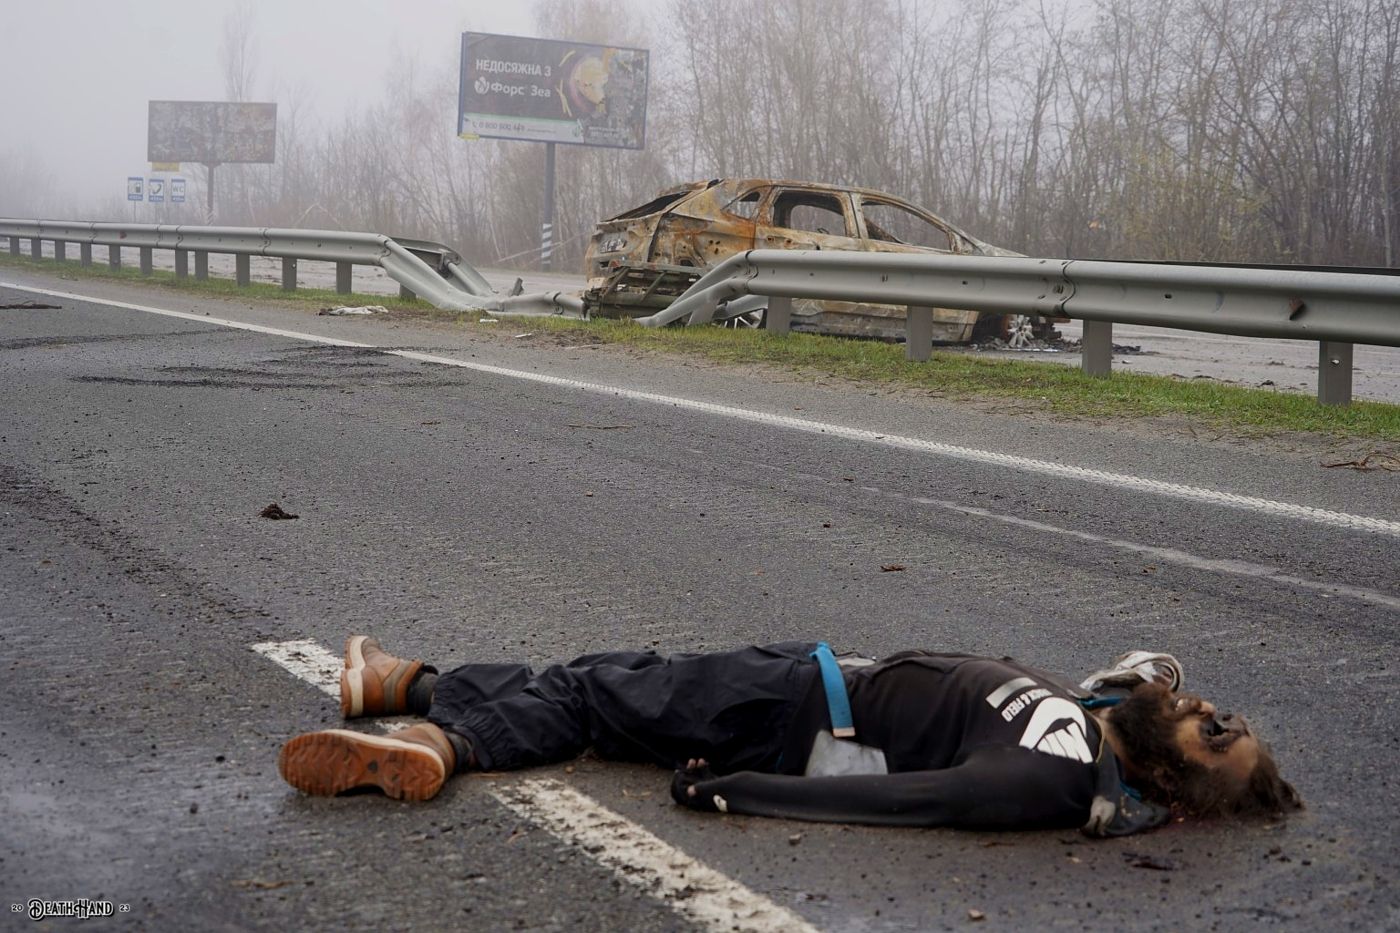 DH - M06 highway carnage beetween towns of Mriia and Myla - Ukraine 22 - early April 2022.jpg